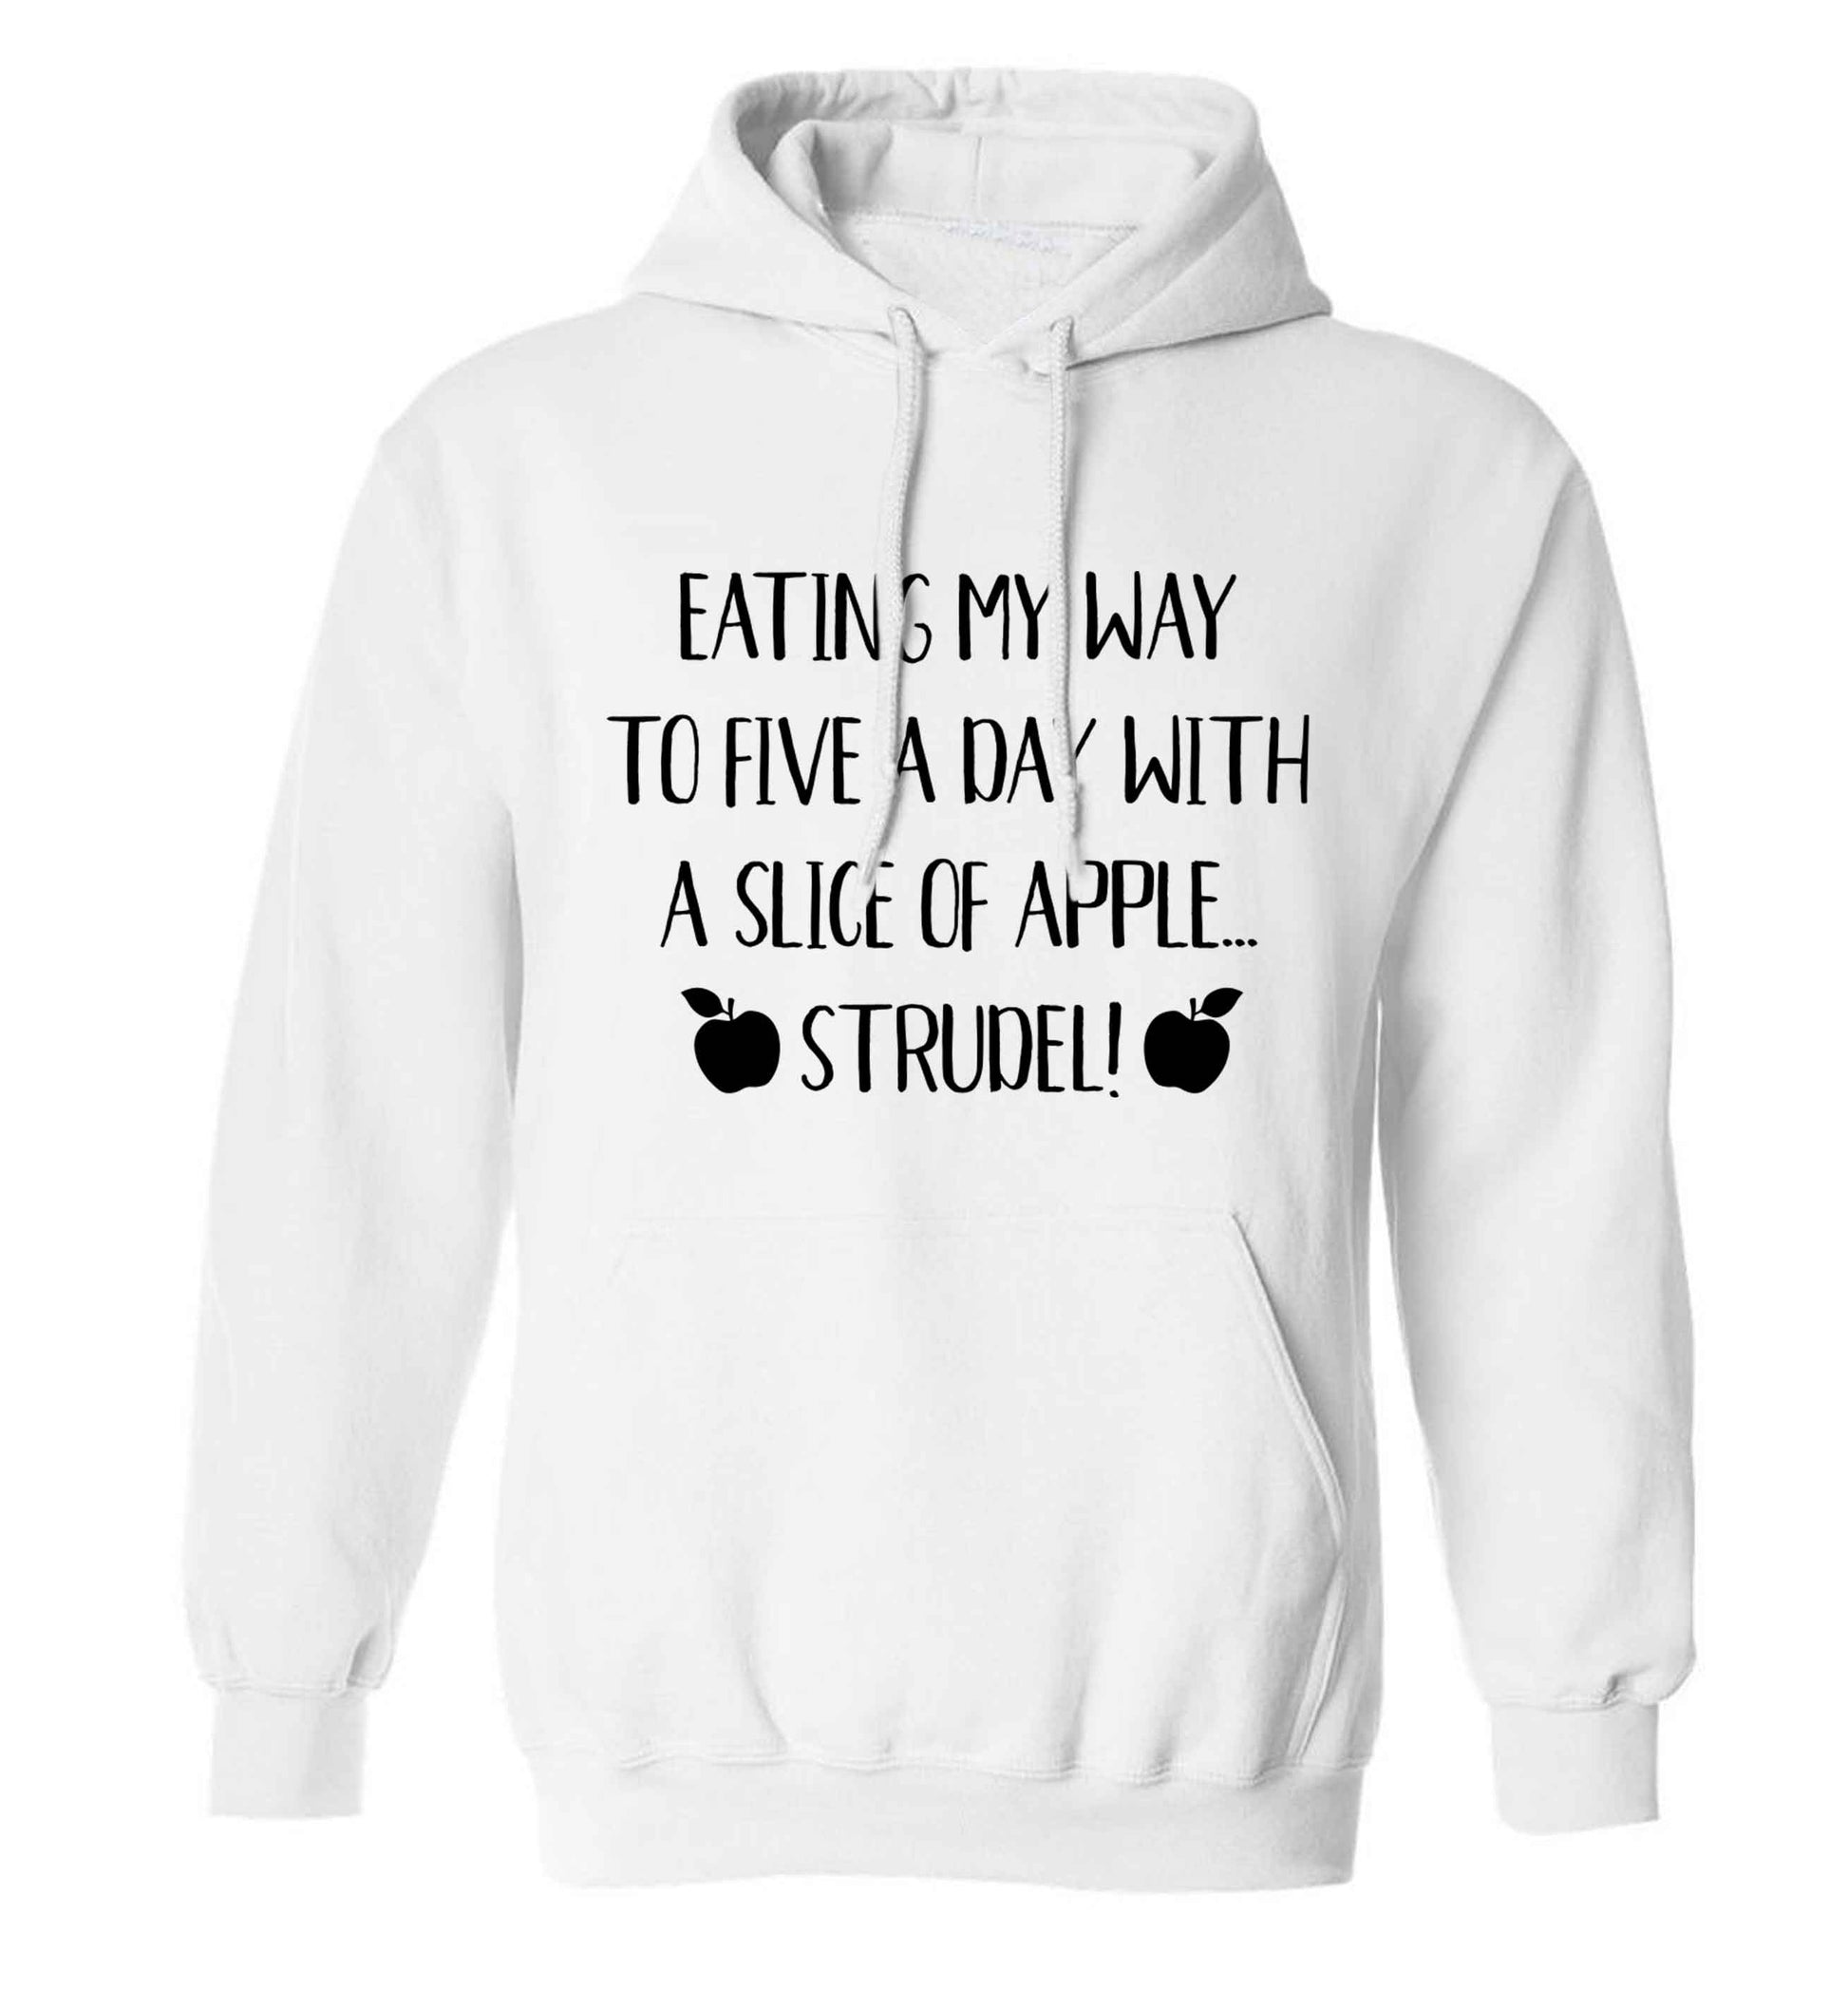 Eating my way to five a day with a slice of apple strudel adults unisex white hoodie 2XL